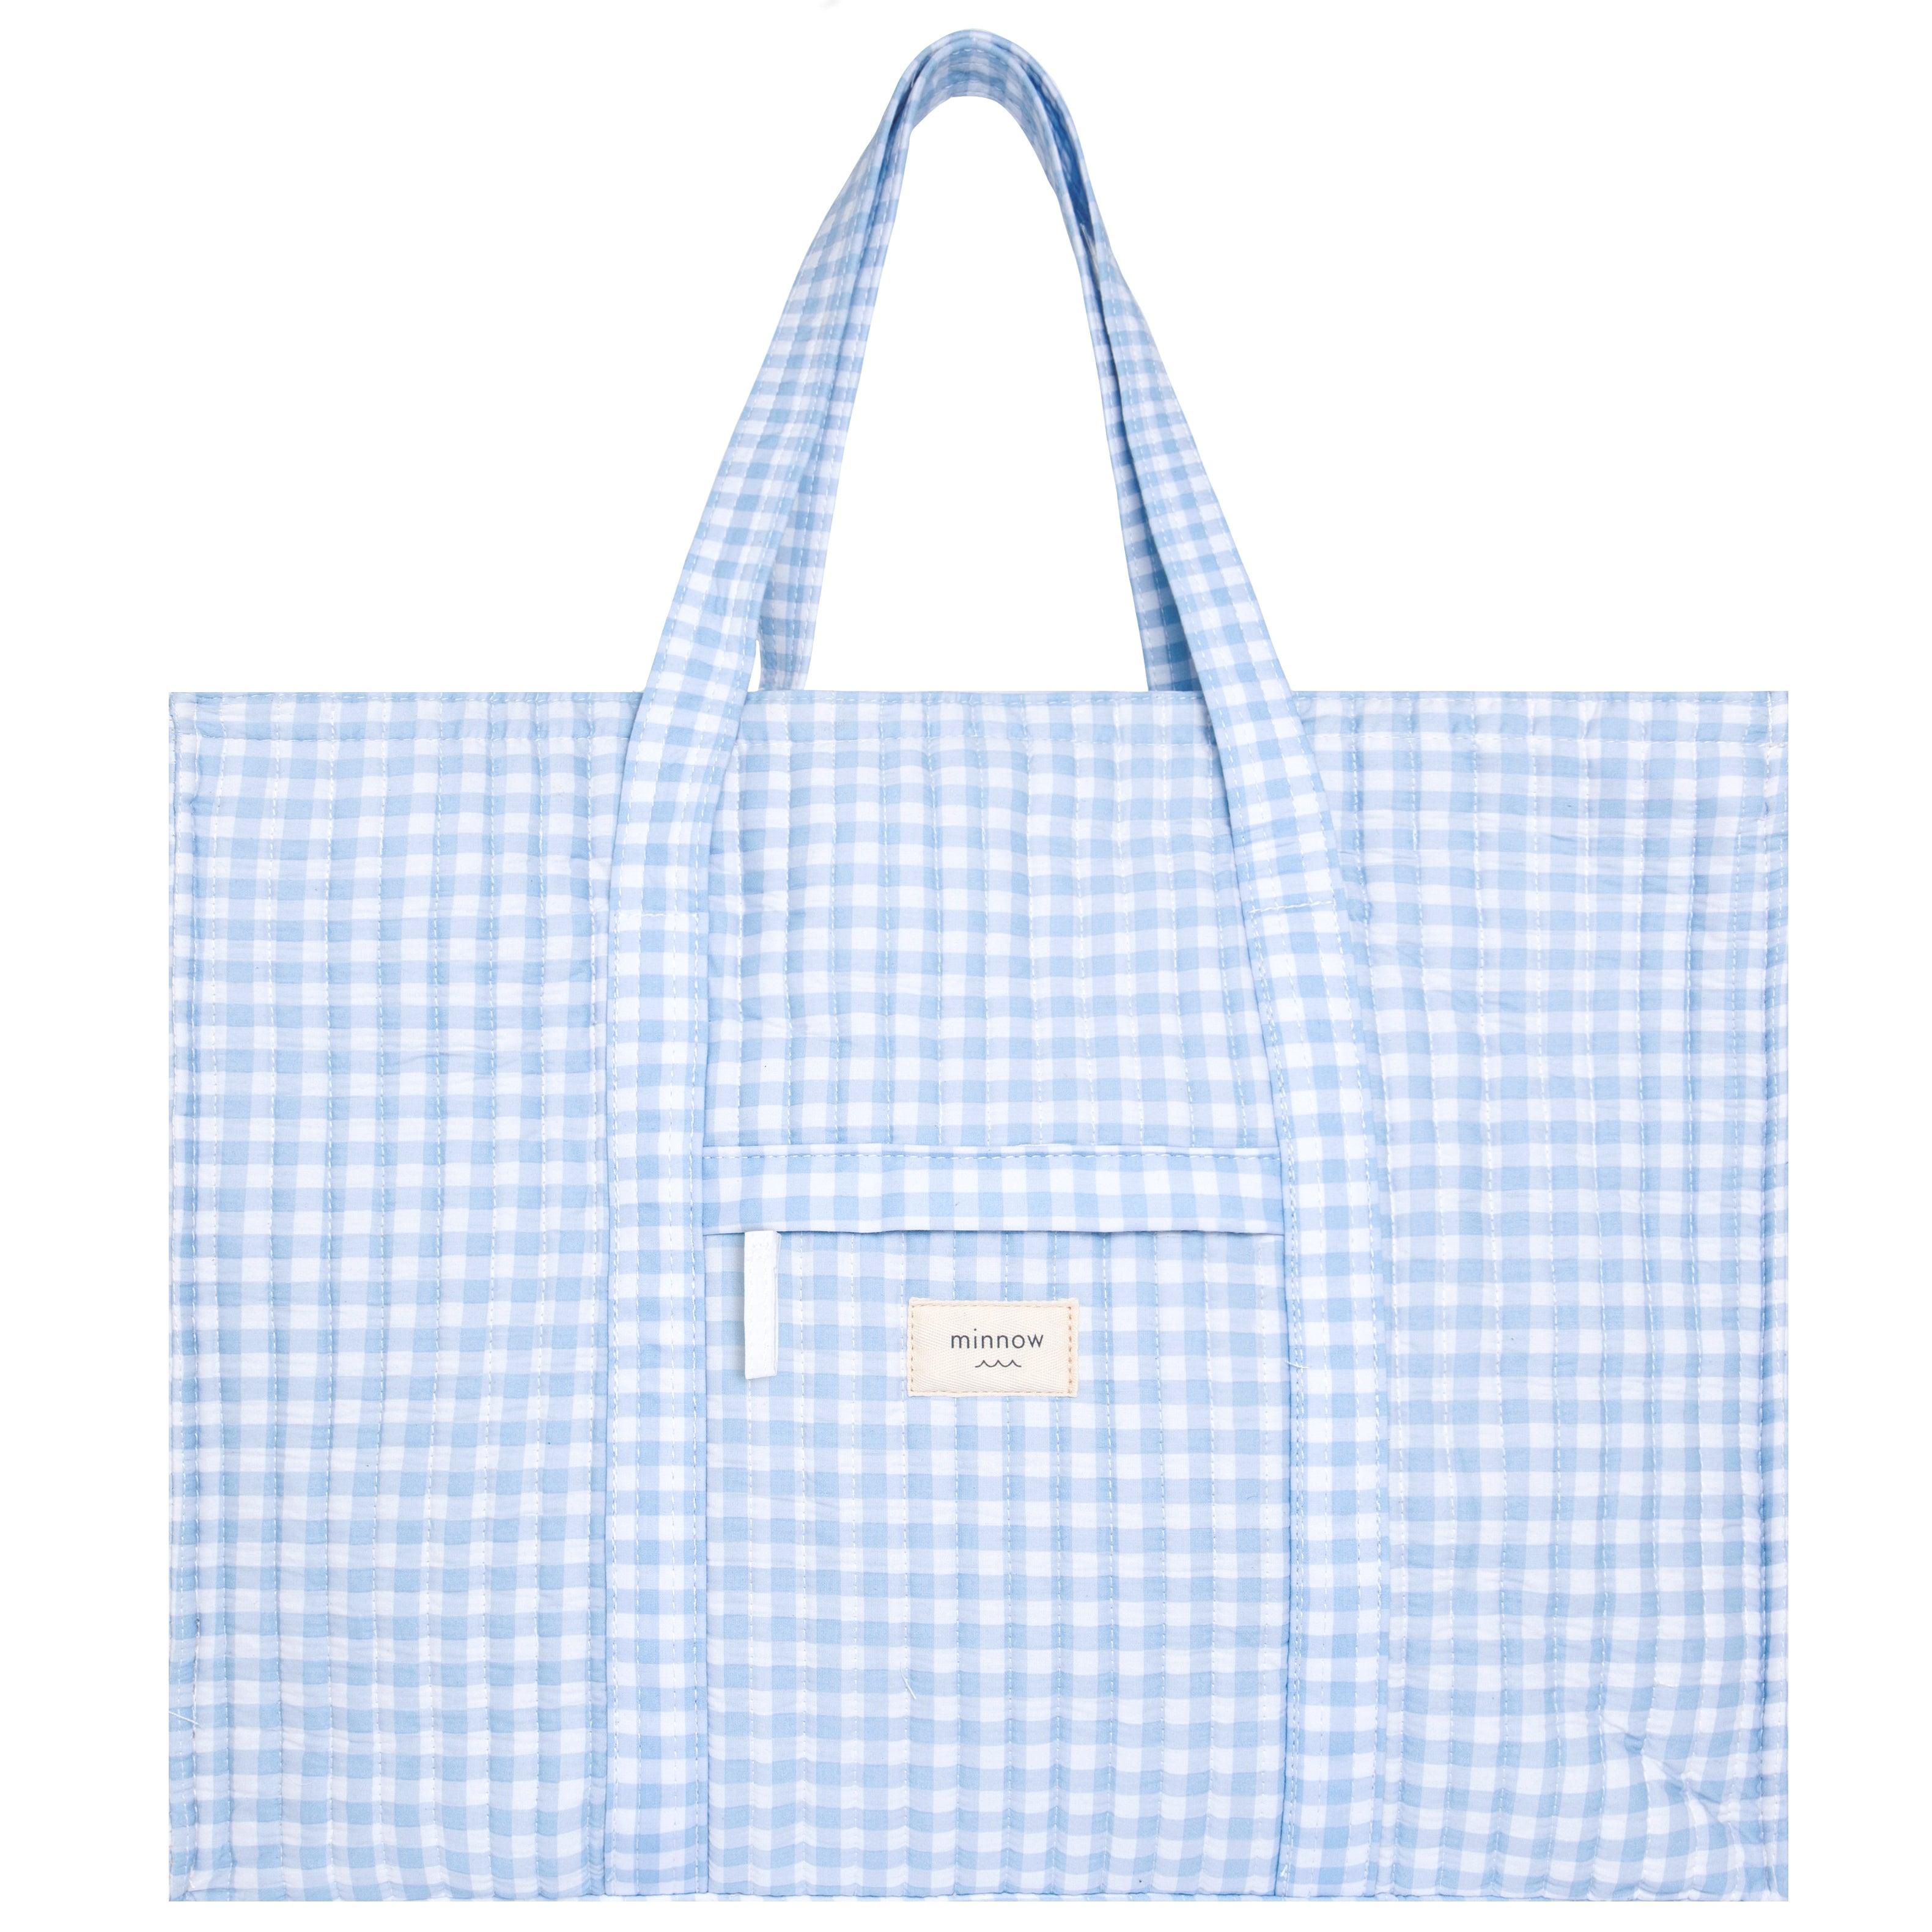 oasis blue gingham overnighter tote – minnow